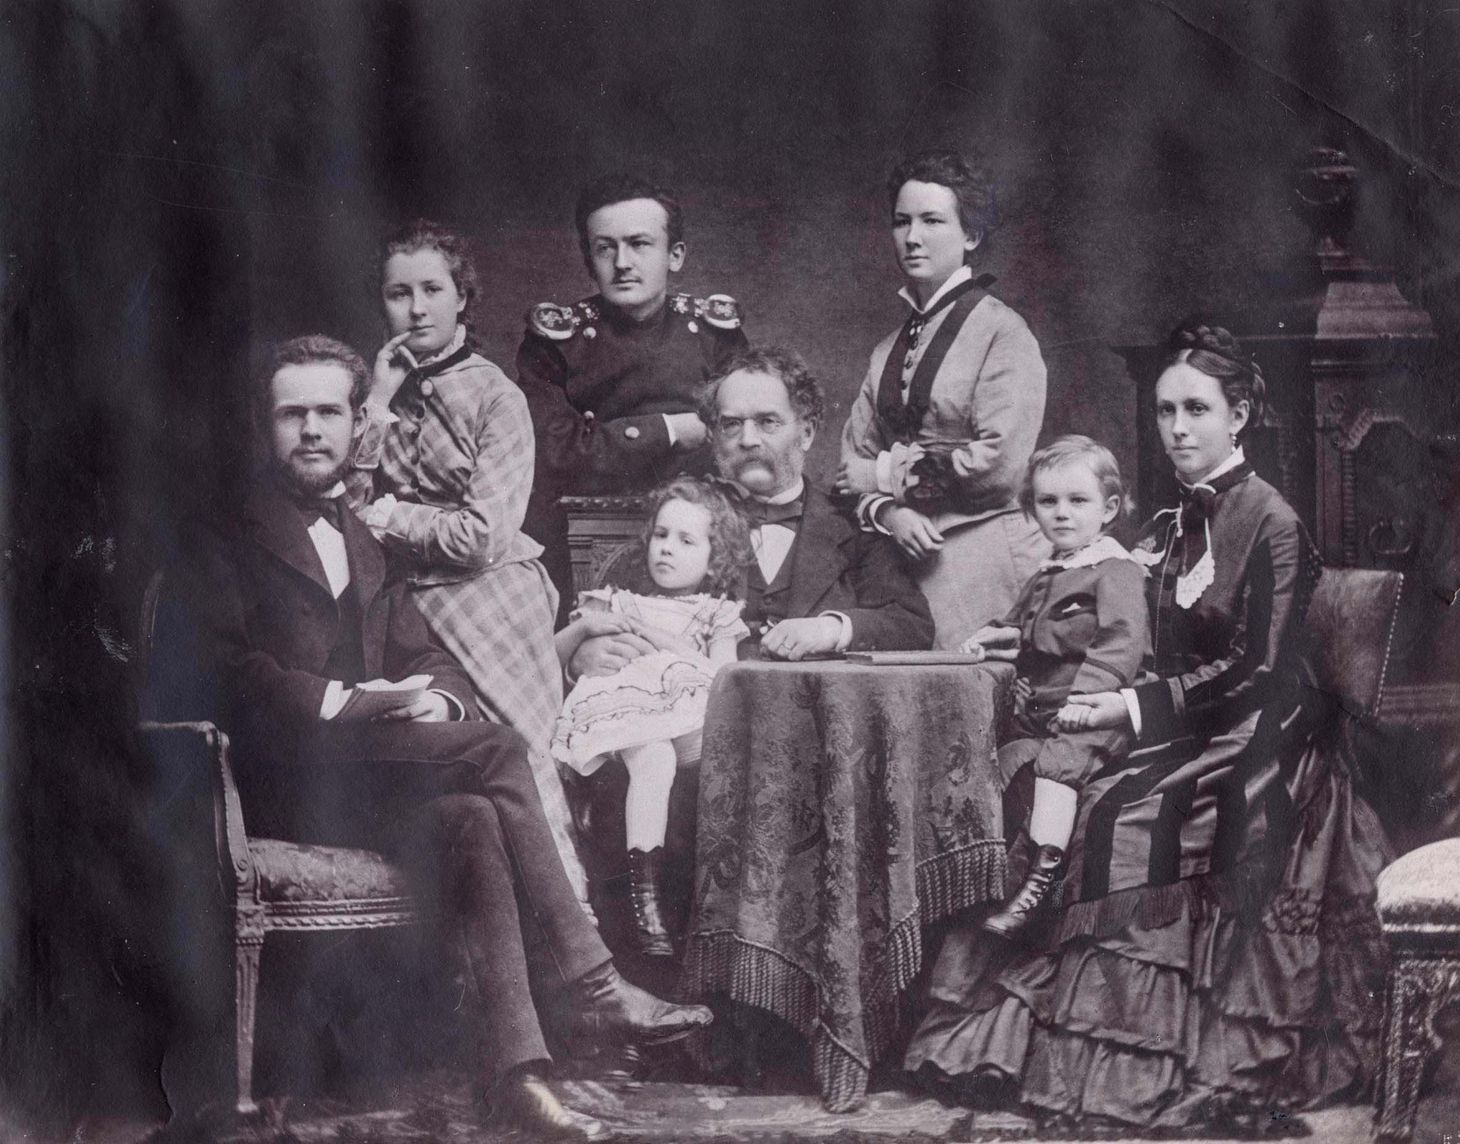 Photo of Werner Siemens and his second wife, Antonie, holding their children Hertha and Carl Friedrich. Seated left and standing right: Arnold, Käthe, Willy and Anna, Werner Siemens’s children from his first marriage to Mathilde Drumann, who died in 1865.